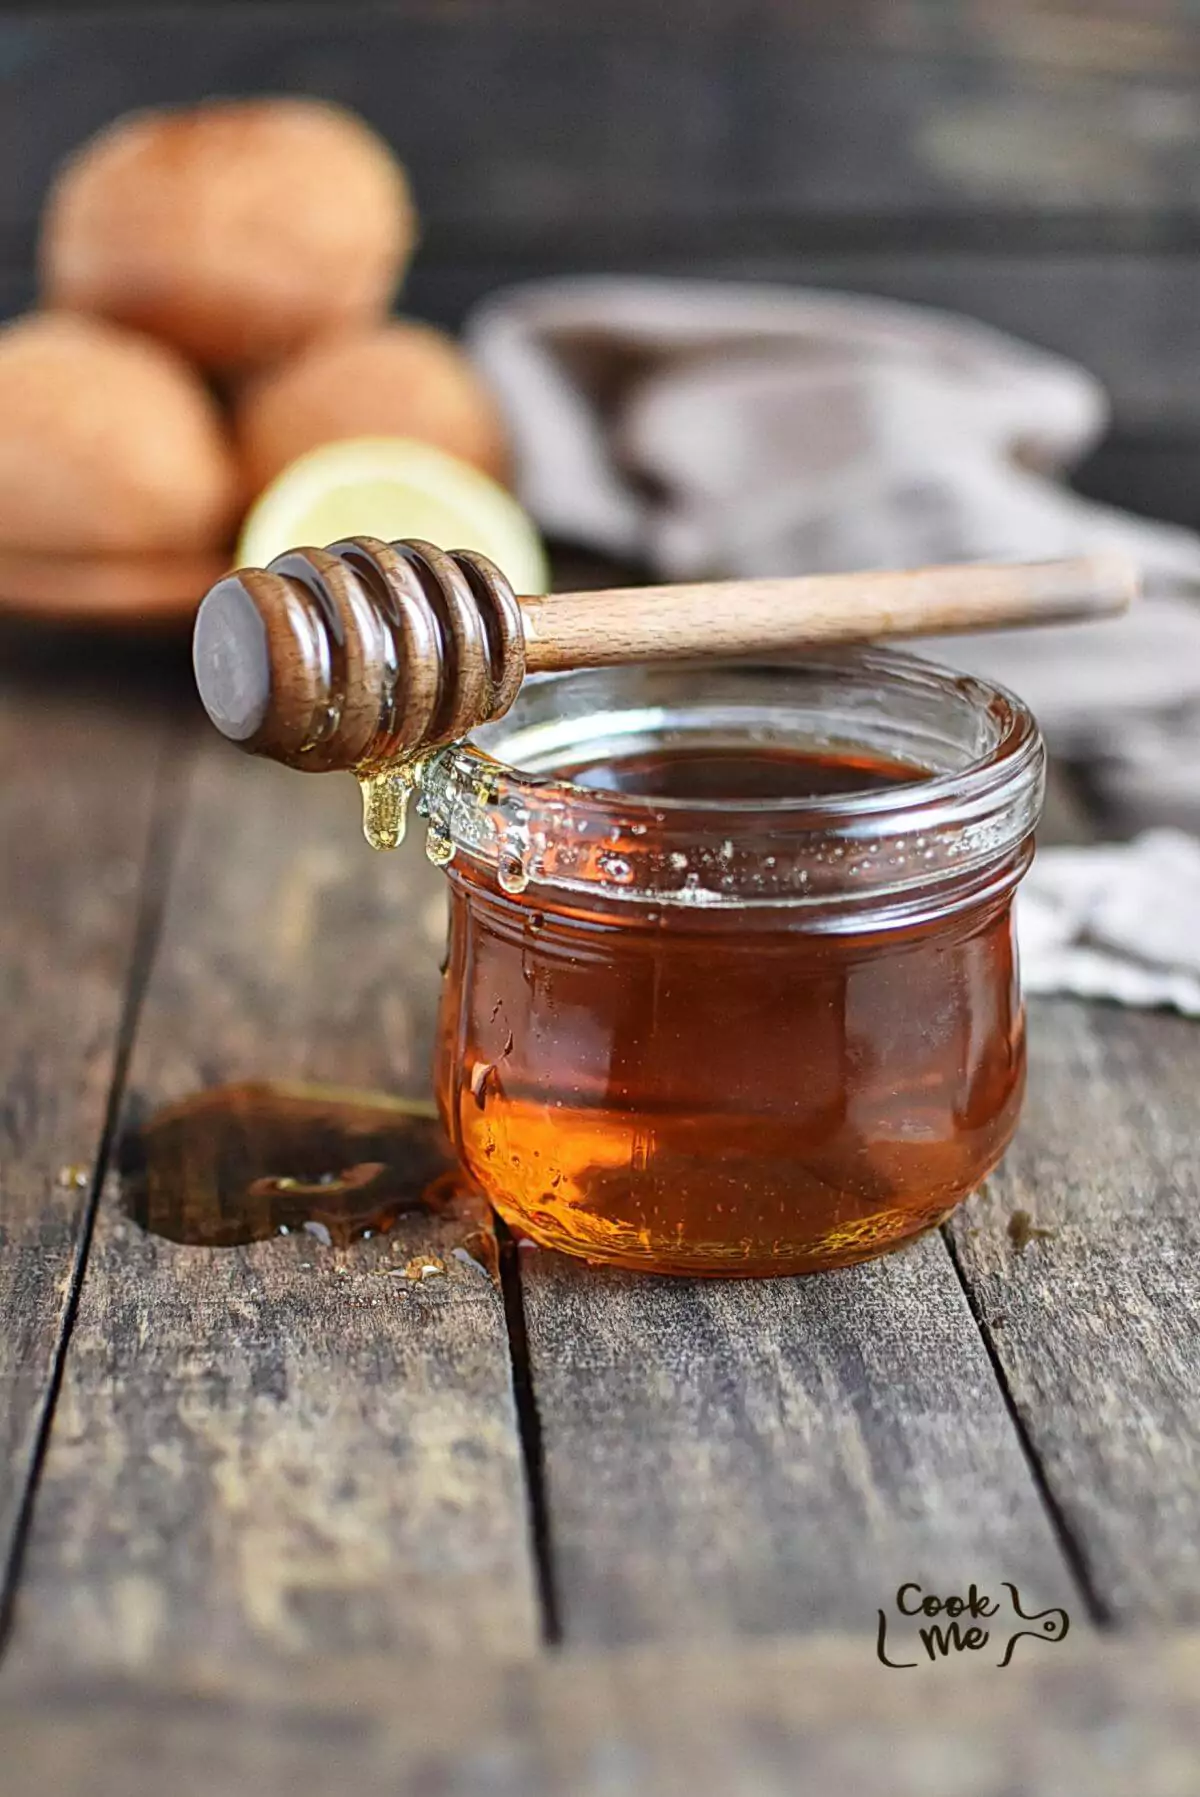 What Is Golden Syrup?